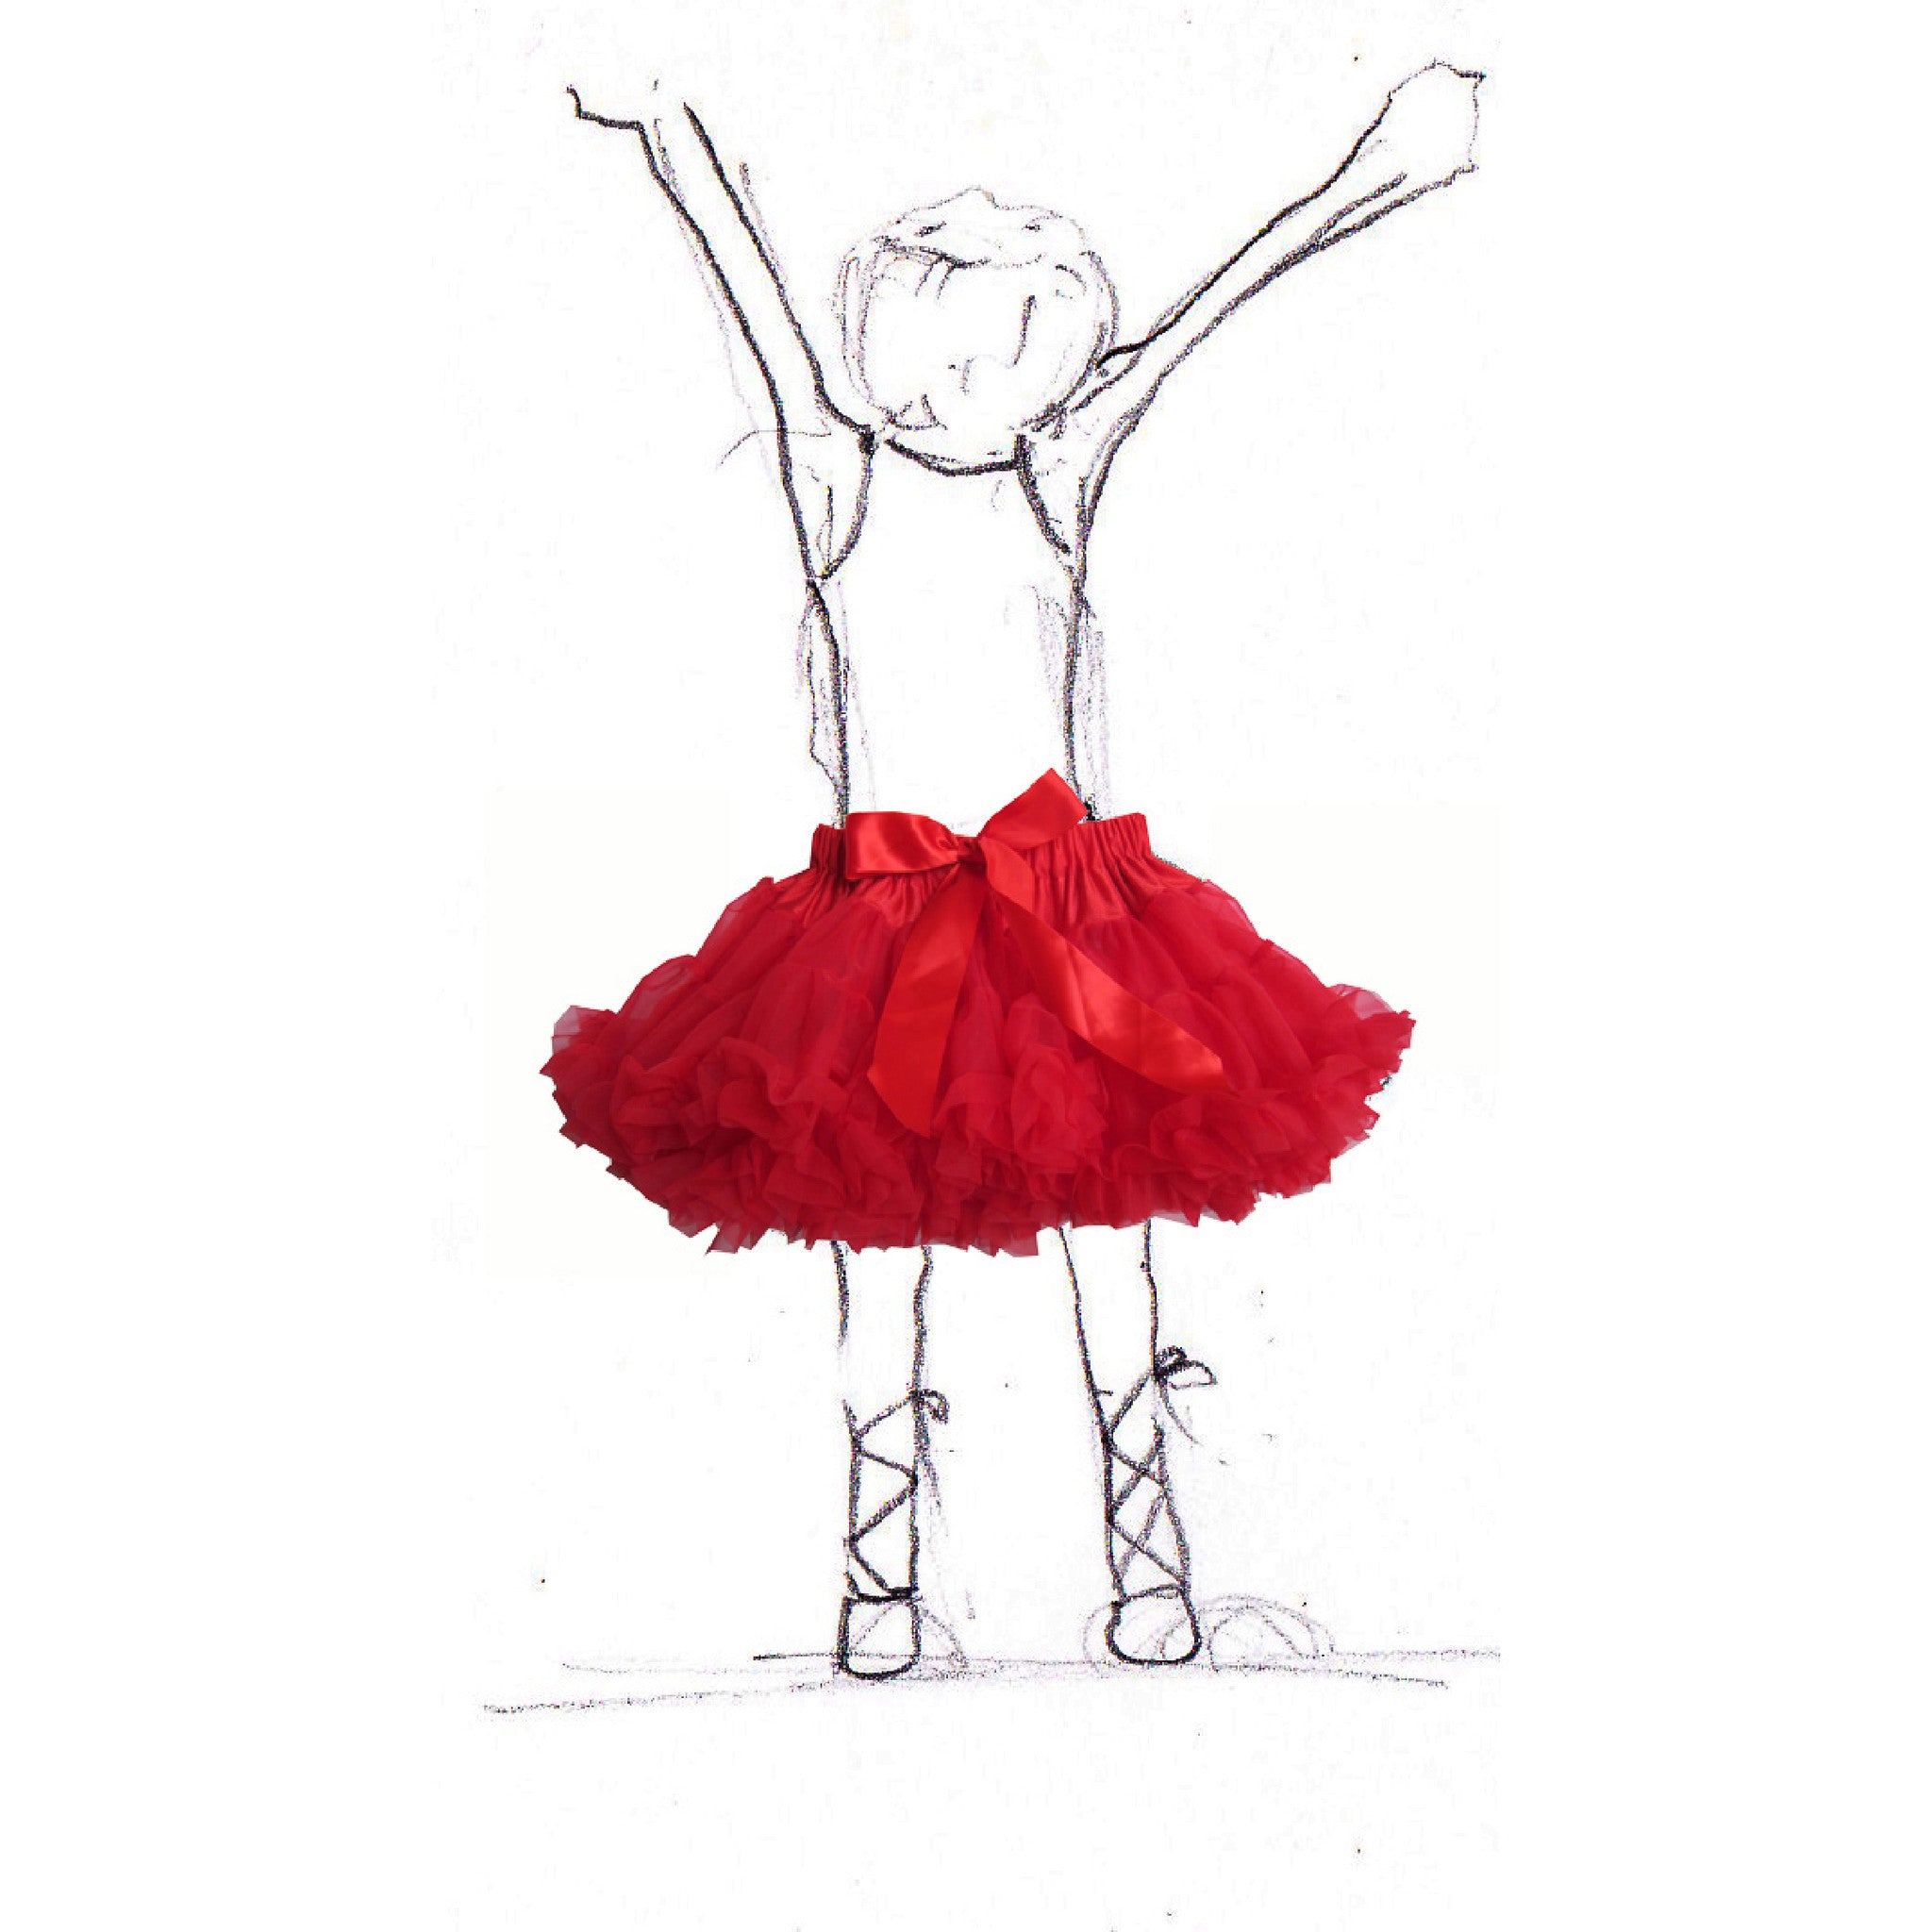 Children's Red Party Petticoat with Ribbon | Palava